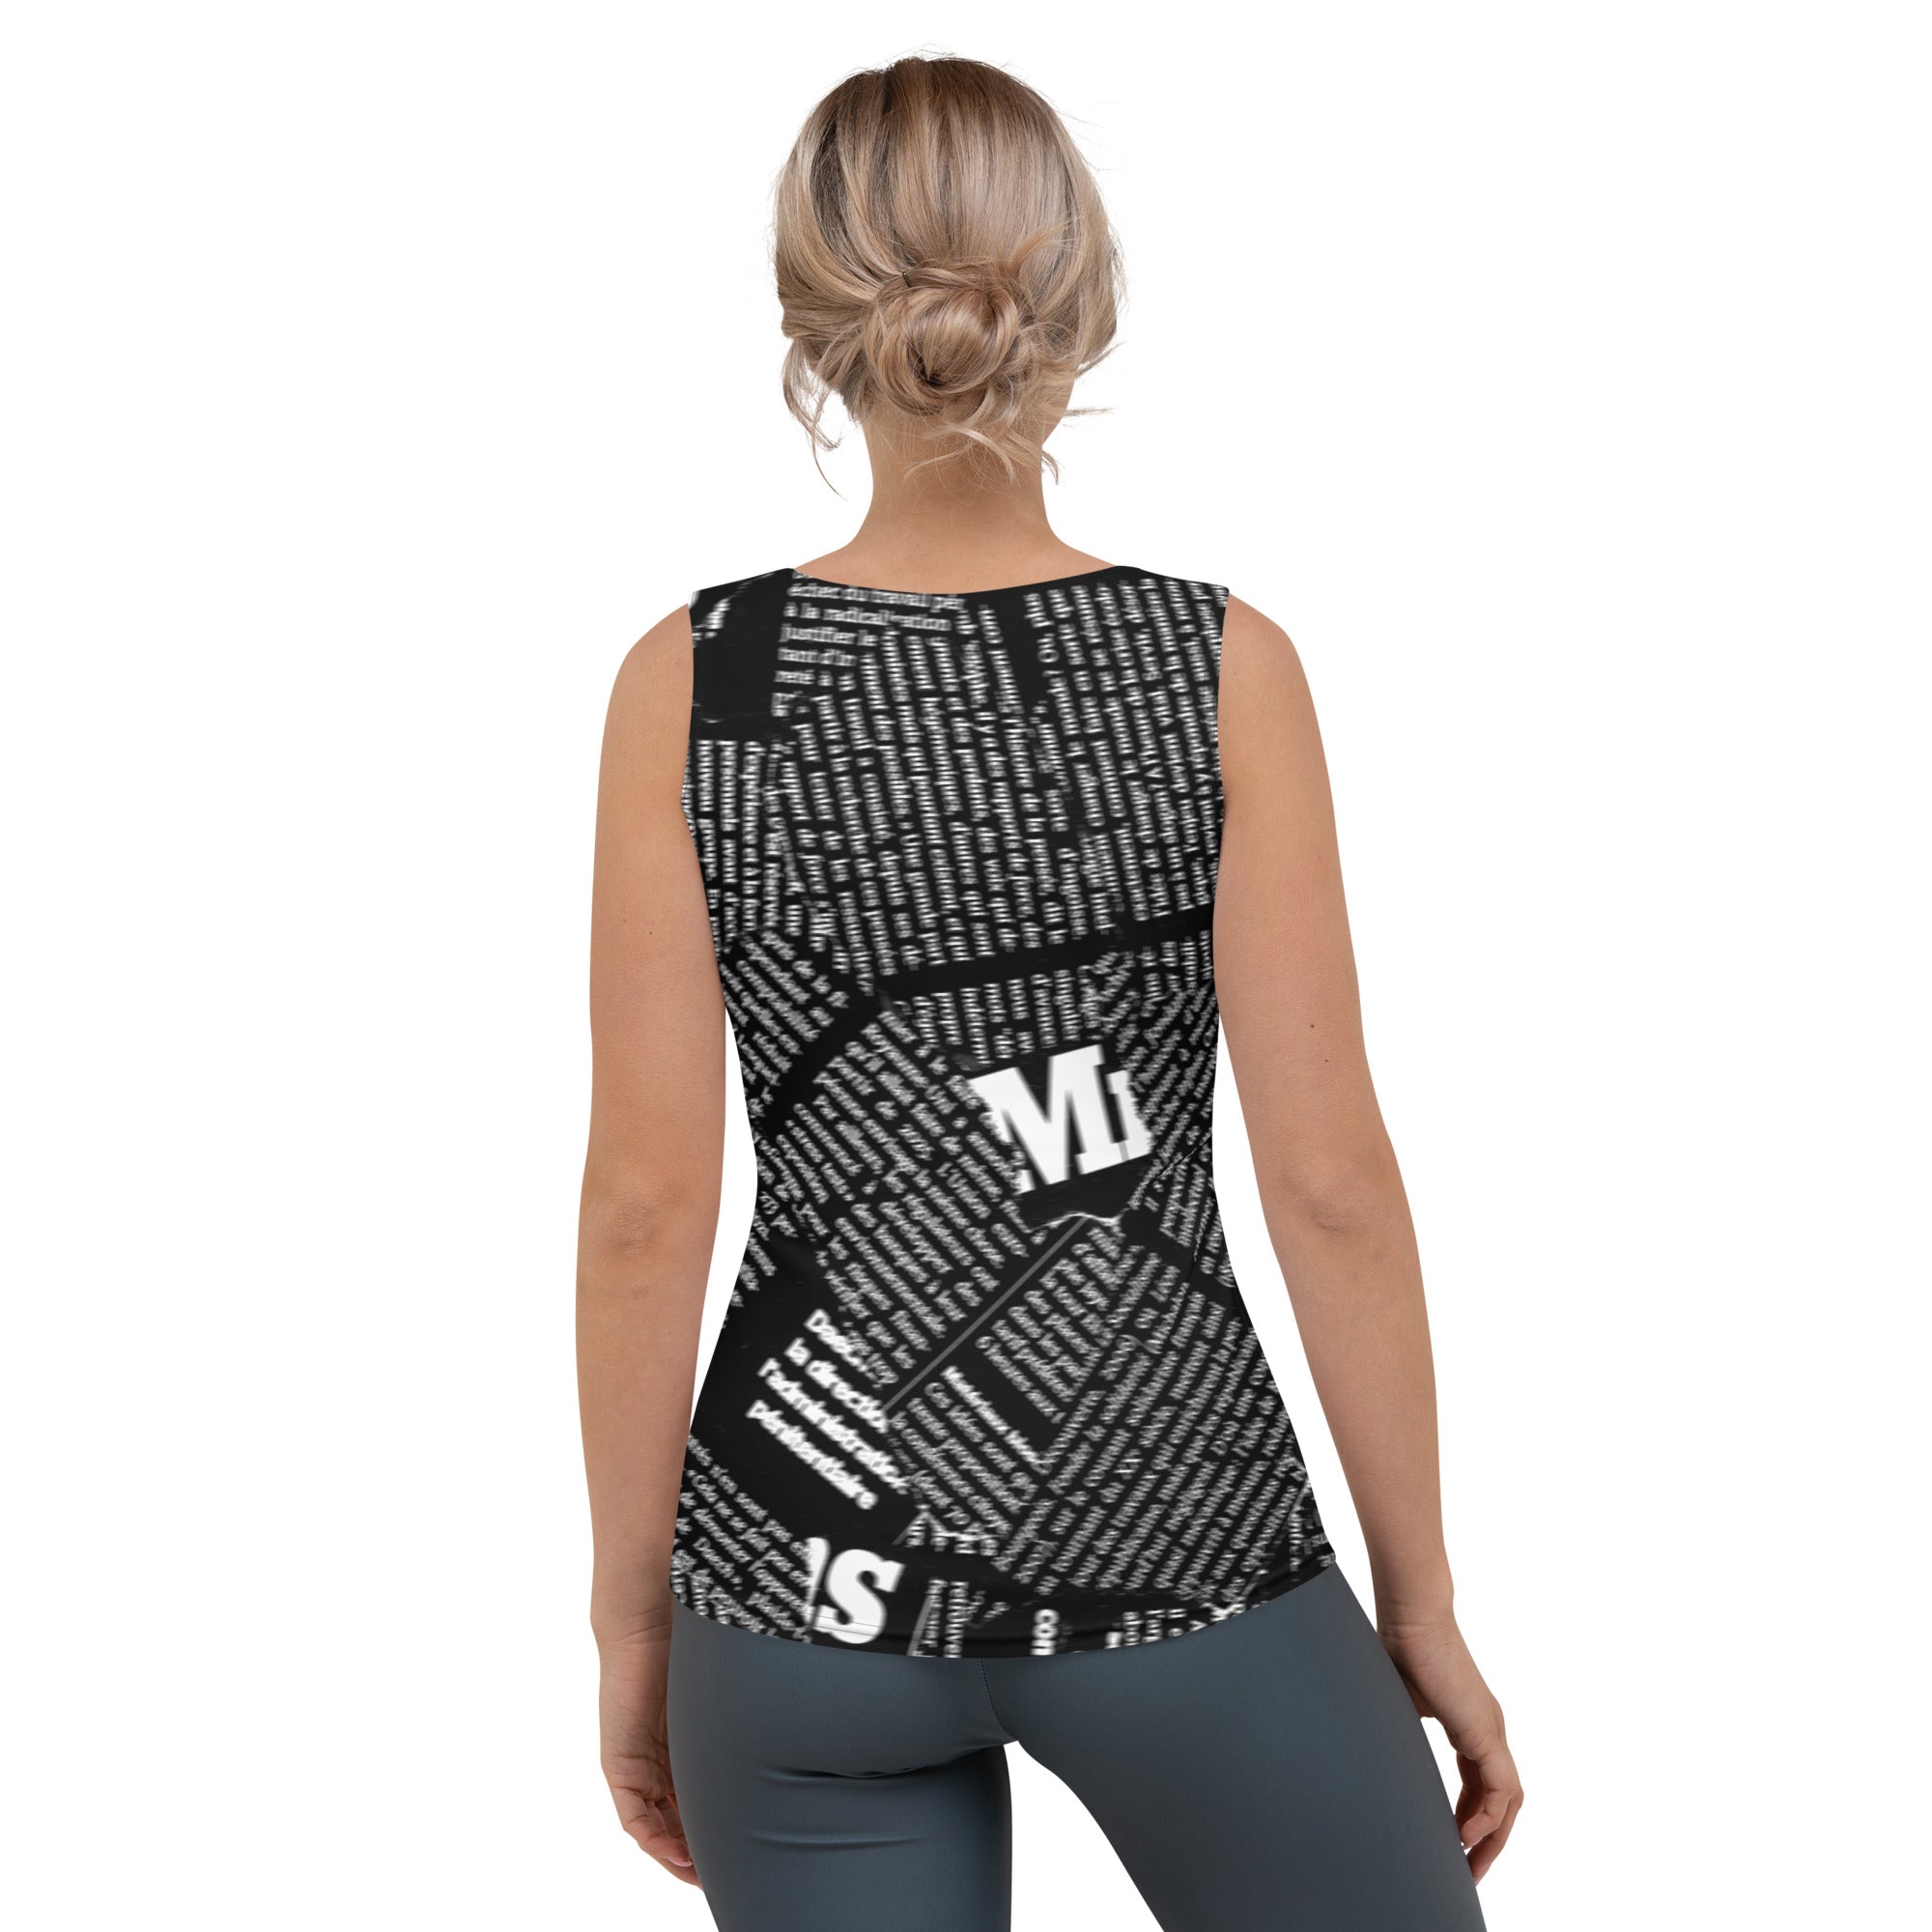 Woman wearing Retro Pop Tank Top with colorful design